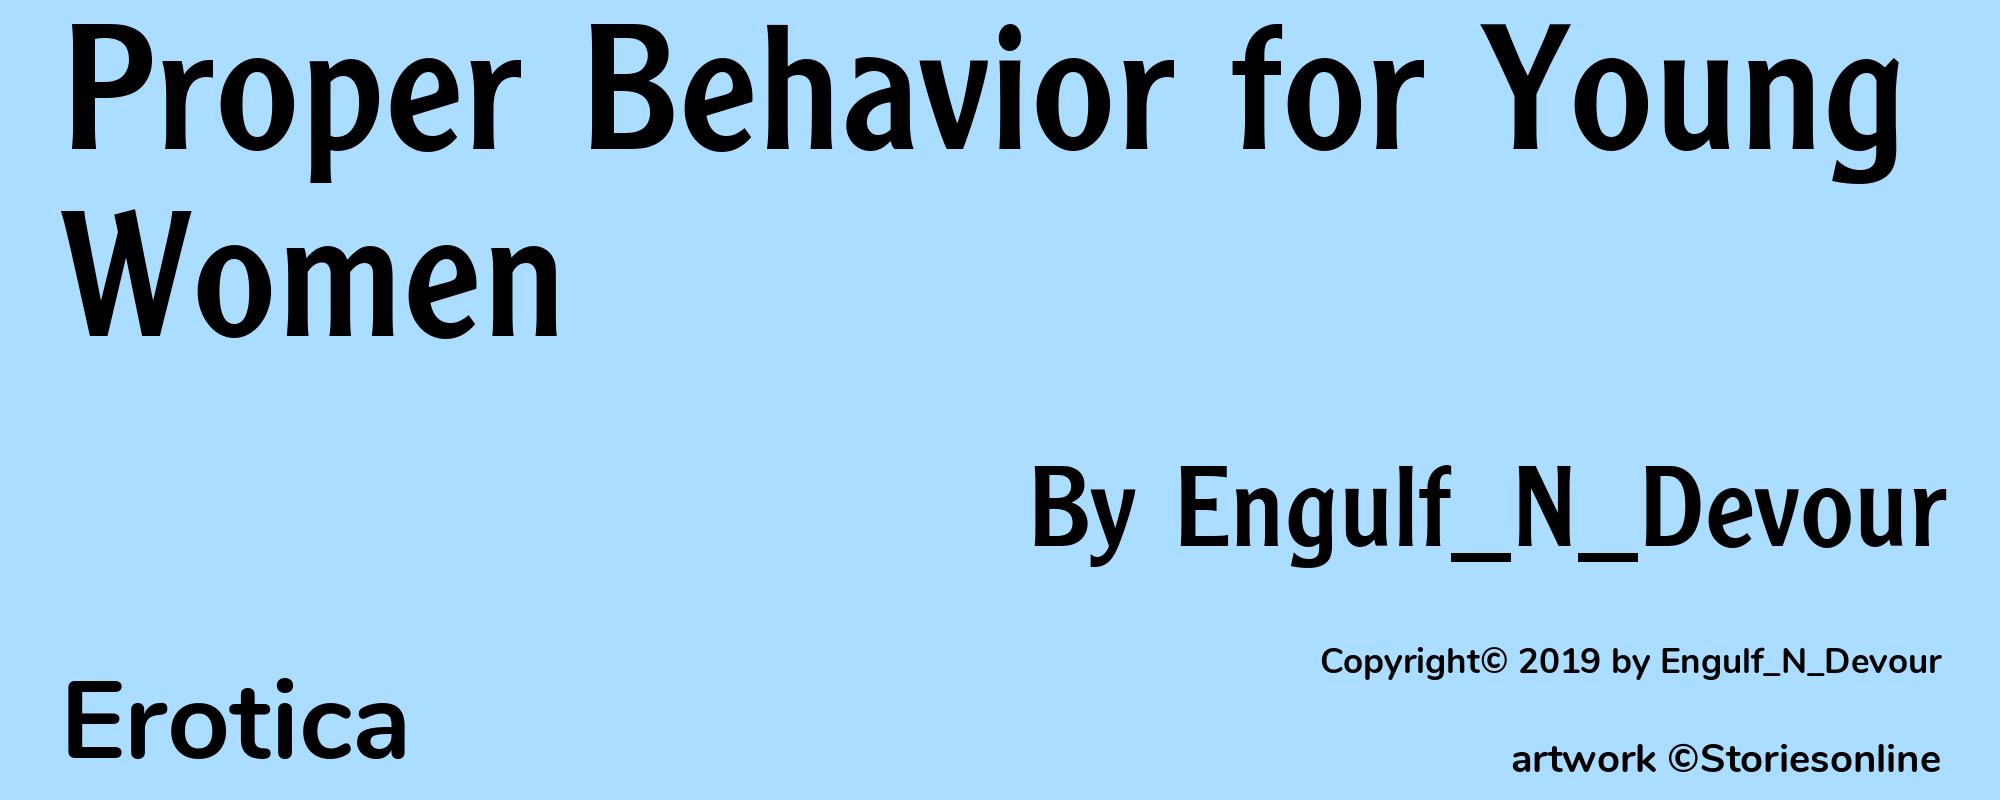 Proper Behavior for Young Women - Cover